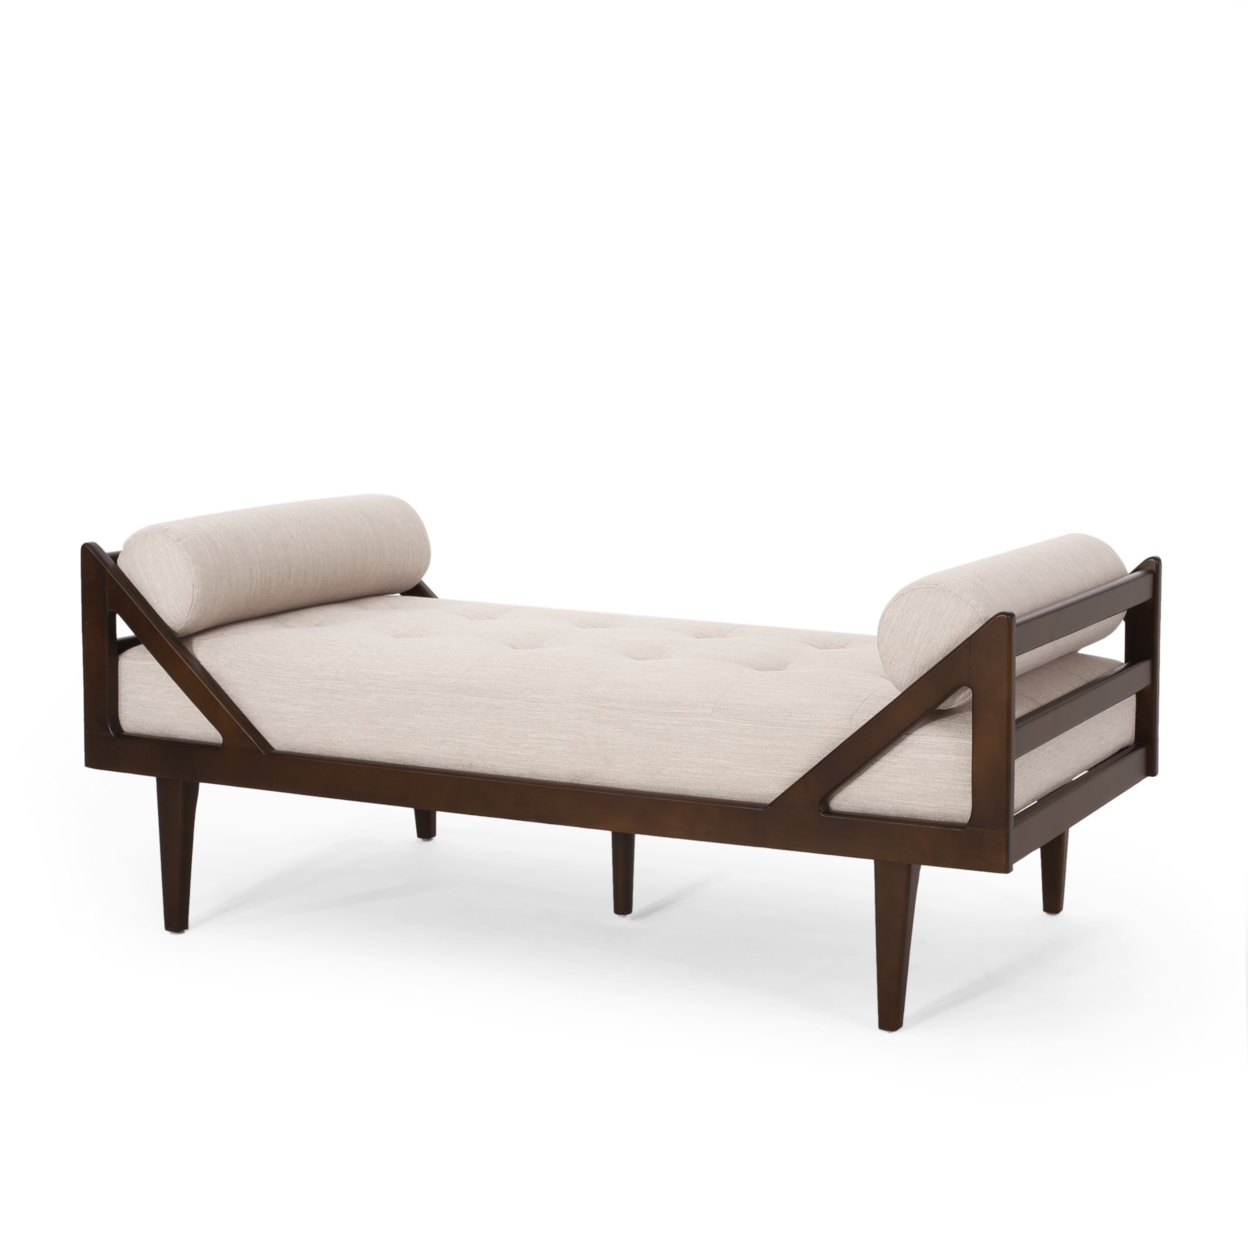 Sumner Contemporary Tufted Chaise Lounge With Rolled Accent Pillows - Dark Brown/beige